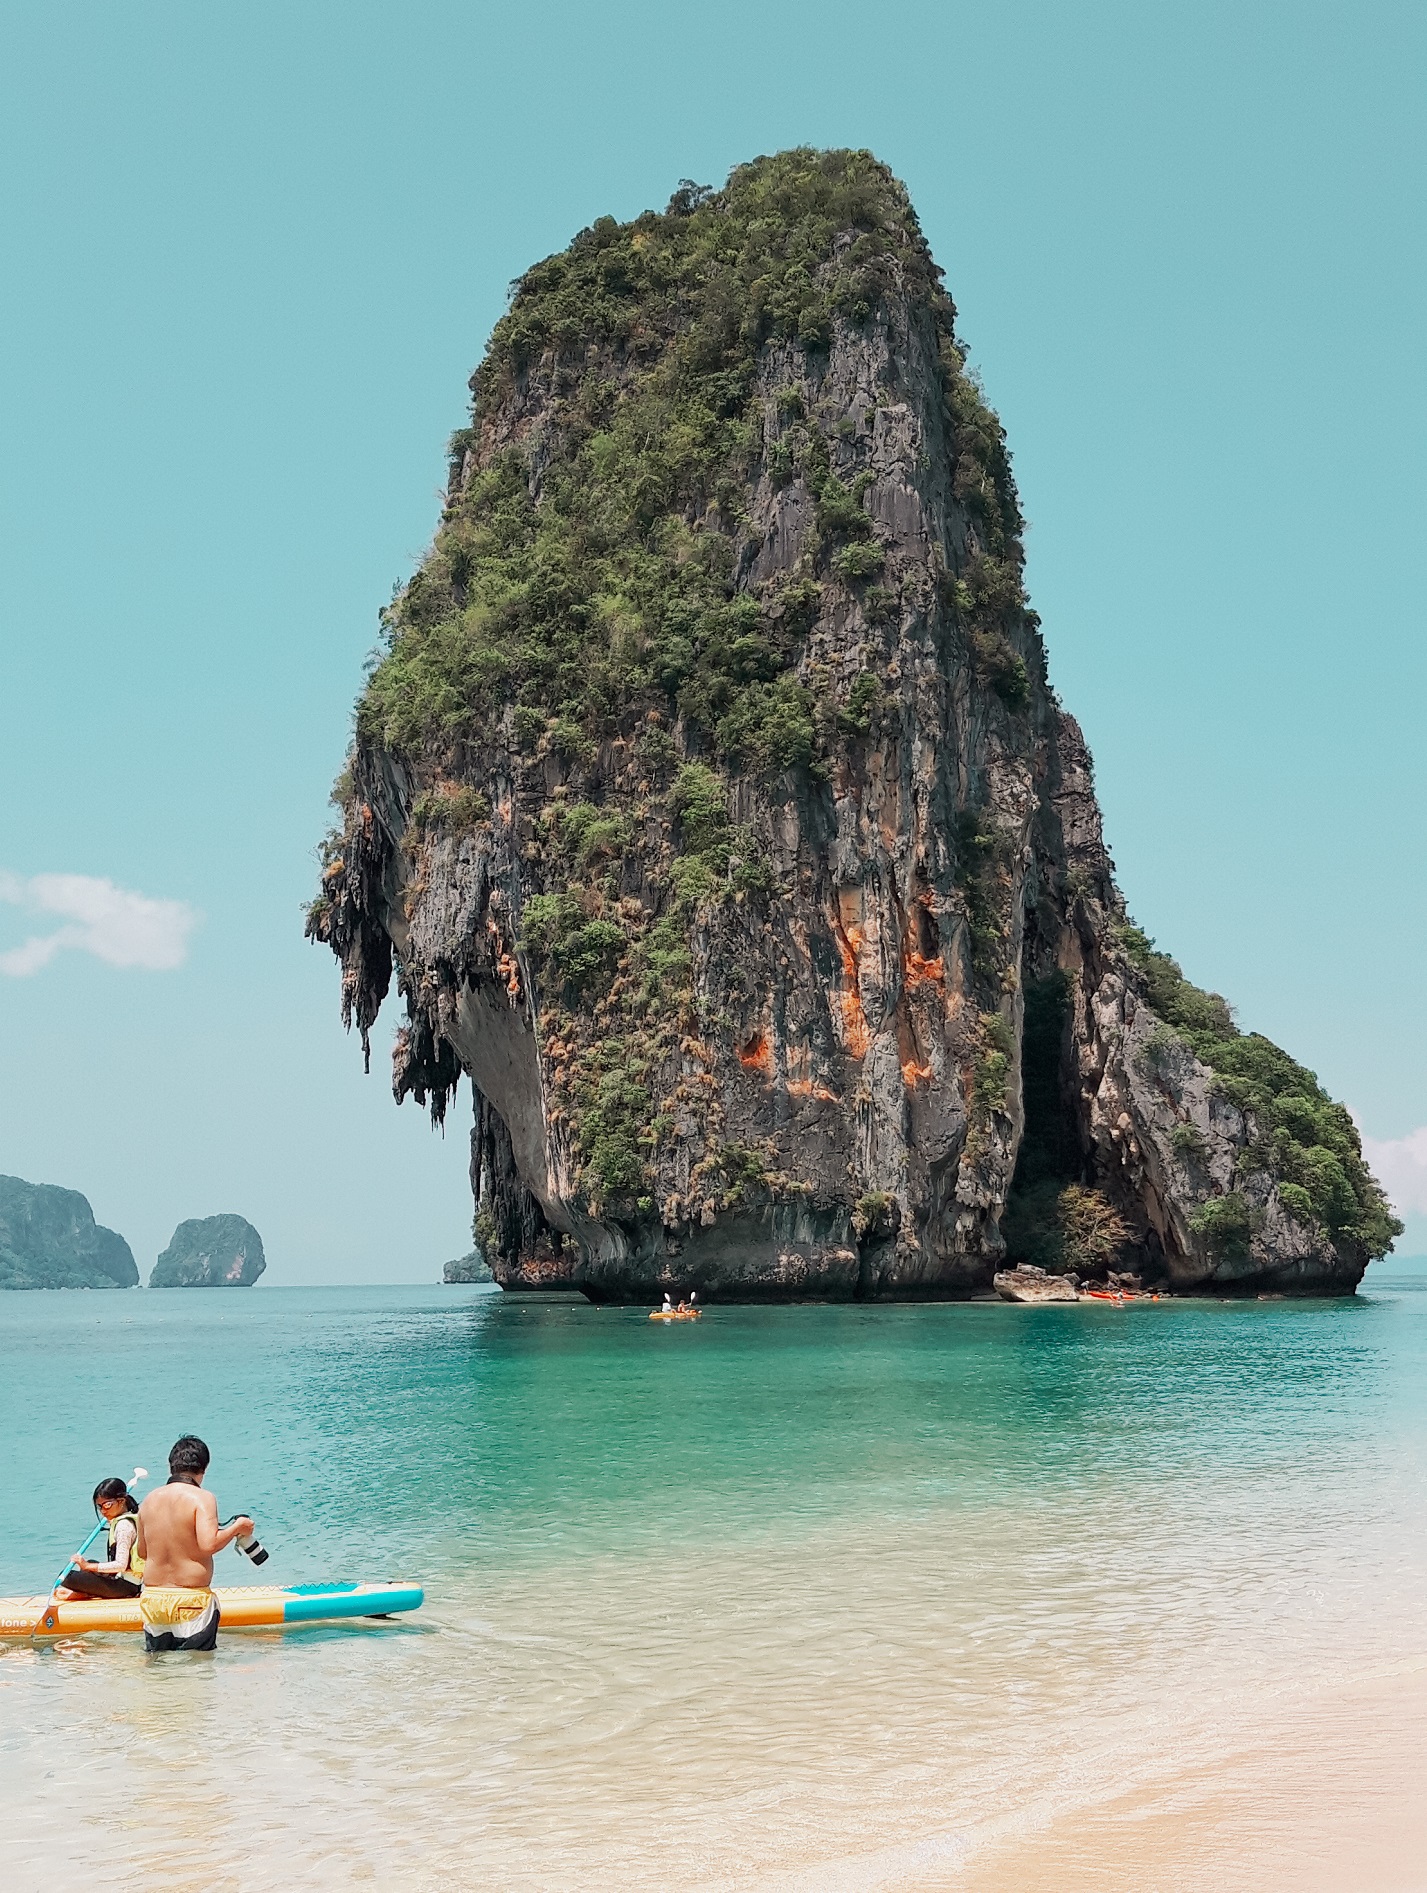 Railay beach viewpoints and what to explore. thailand- while you stay home